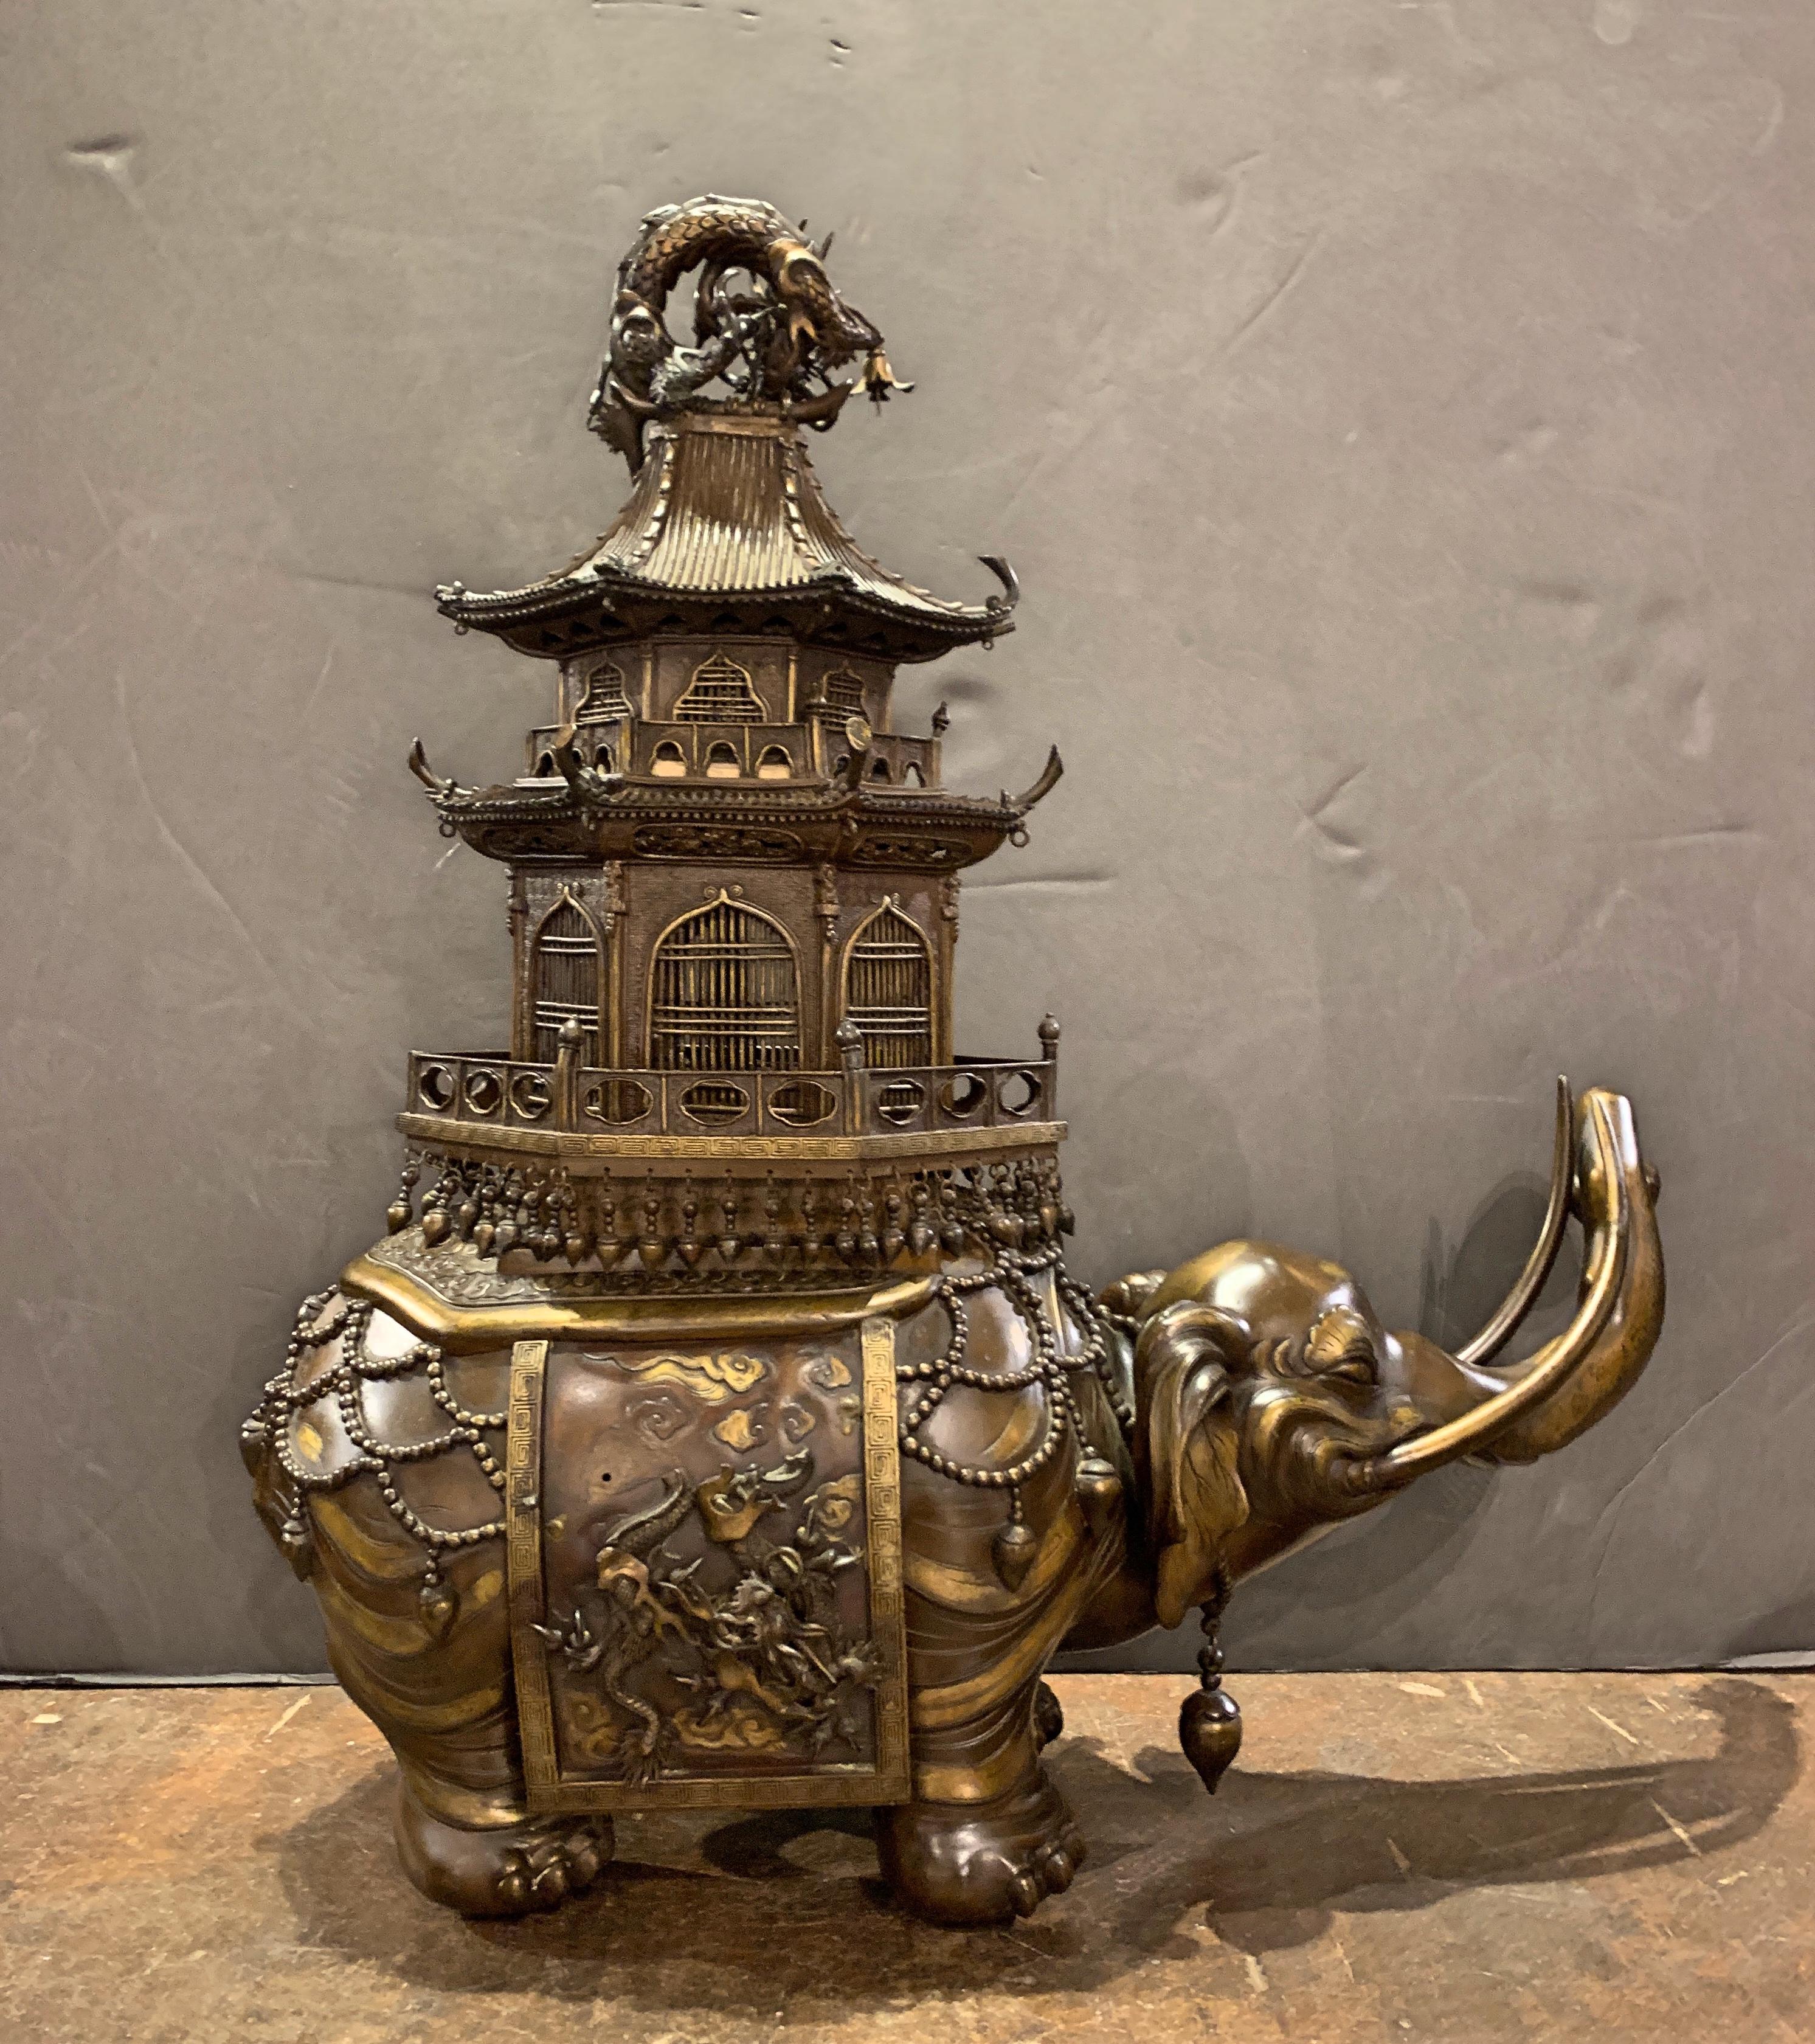 A large and impressive Japanese cast and parcel gilt bronze koro (incense burner) in the form of a caparisoned elephant carrying a pagoda on its back, Meiji Period, late 19th century, Japan. 

The elephant has been well cast with charming details.